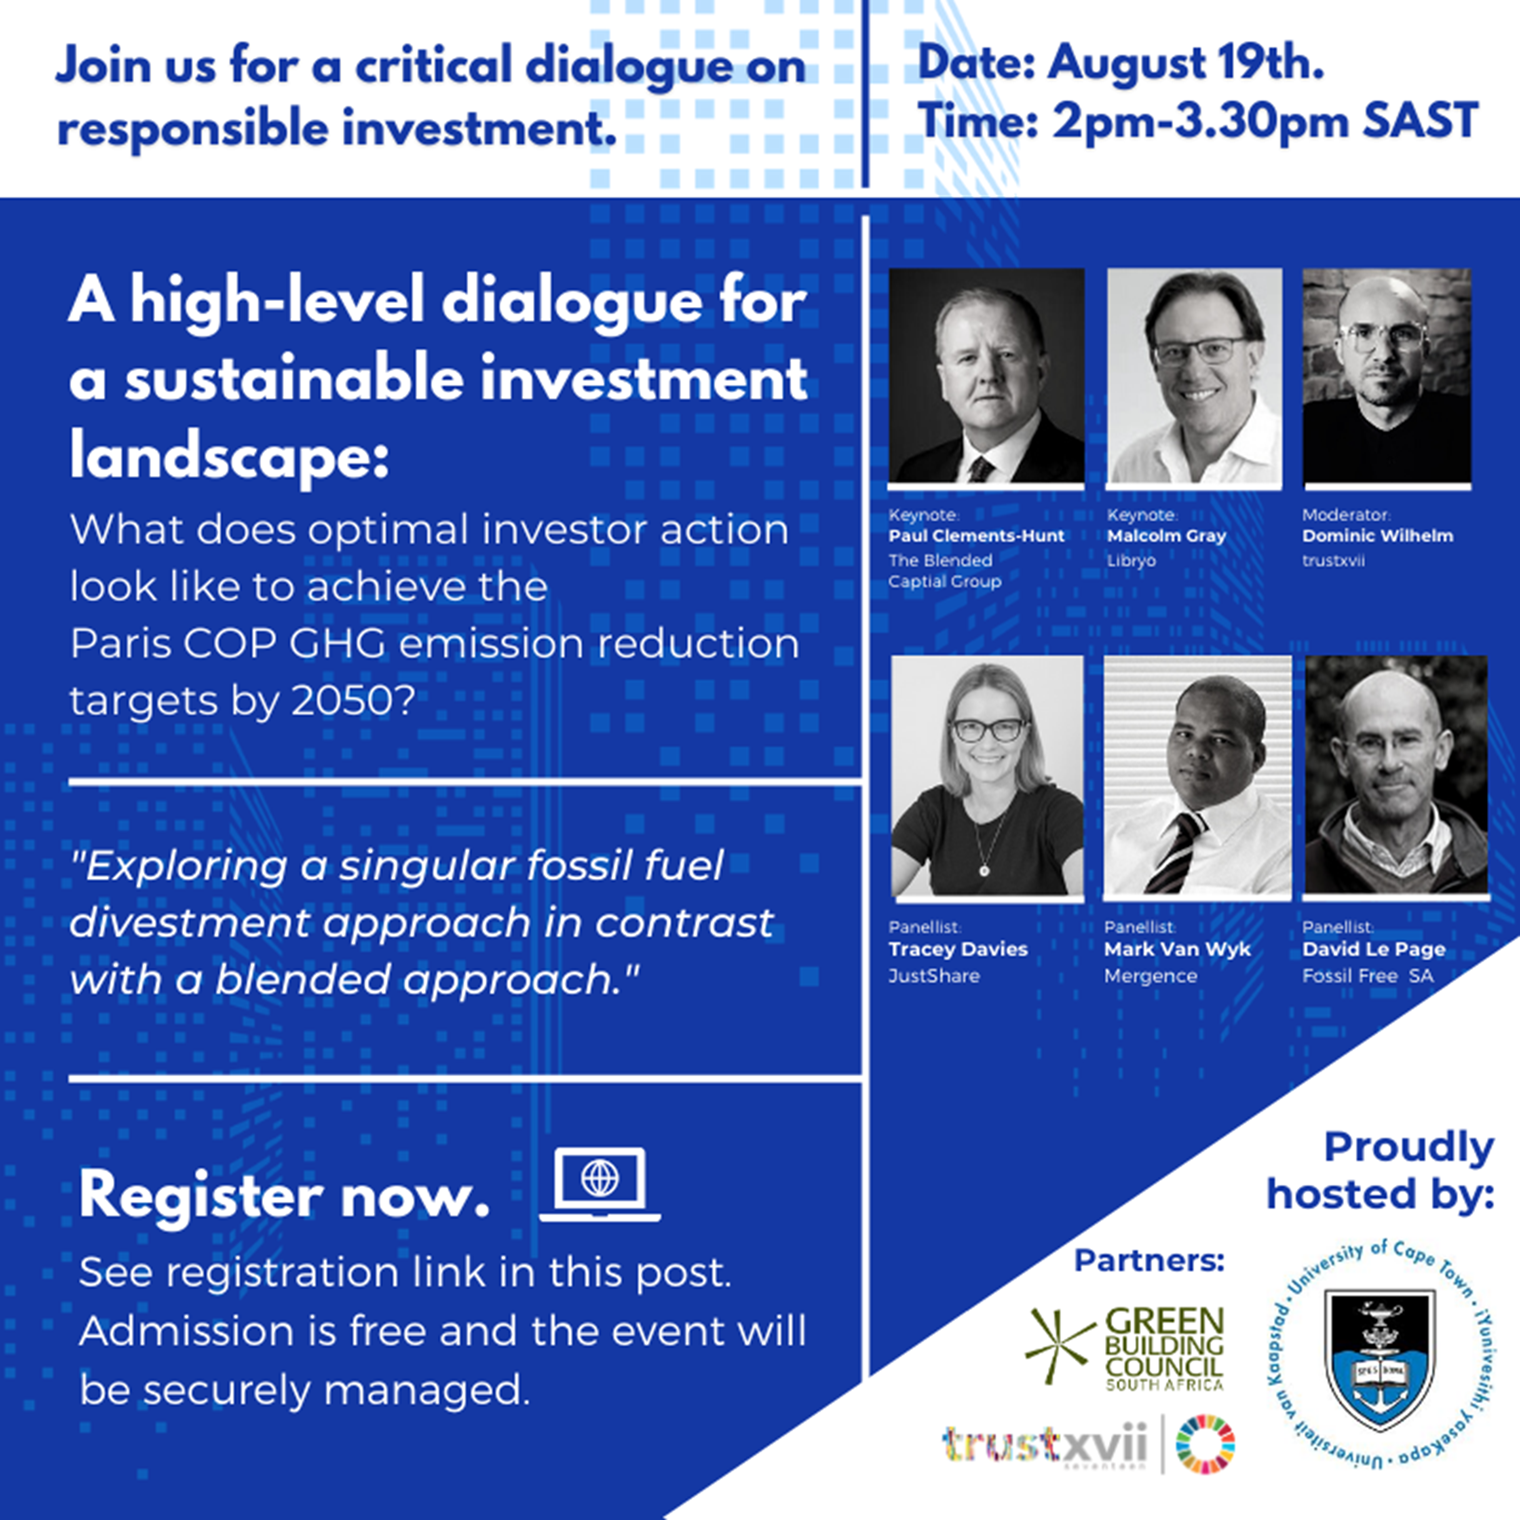 A high-level dialogue for a sustainable investment landscape